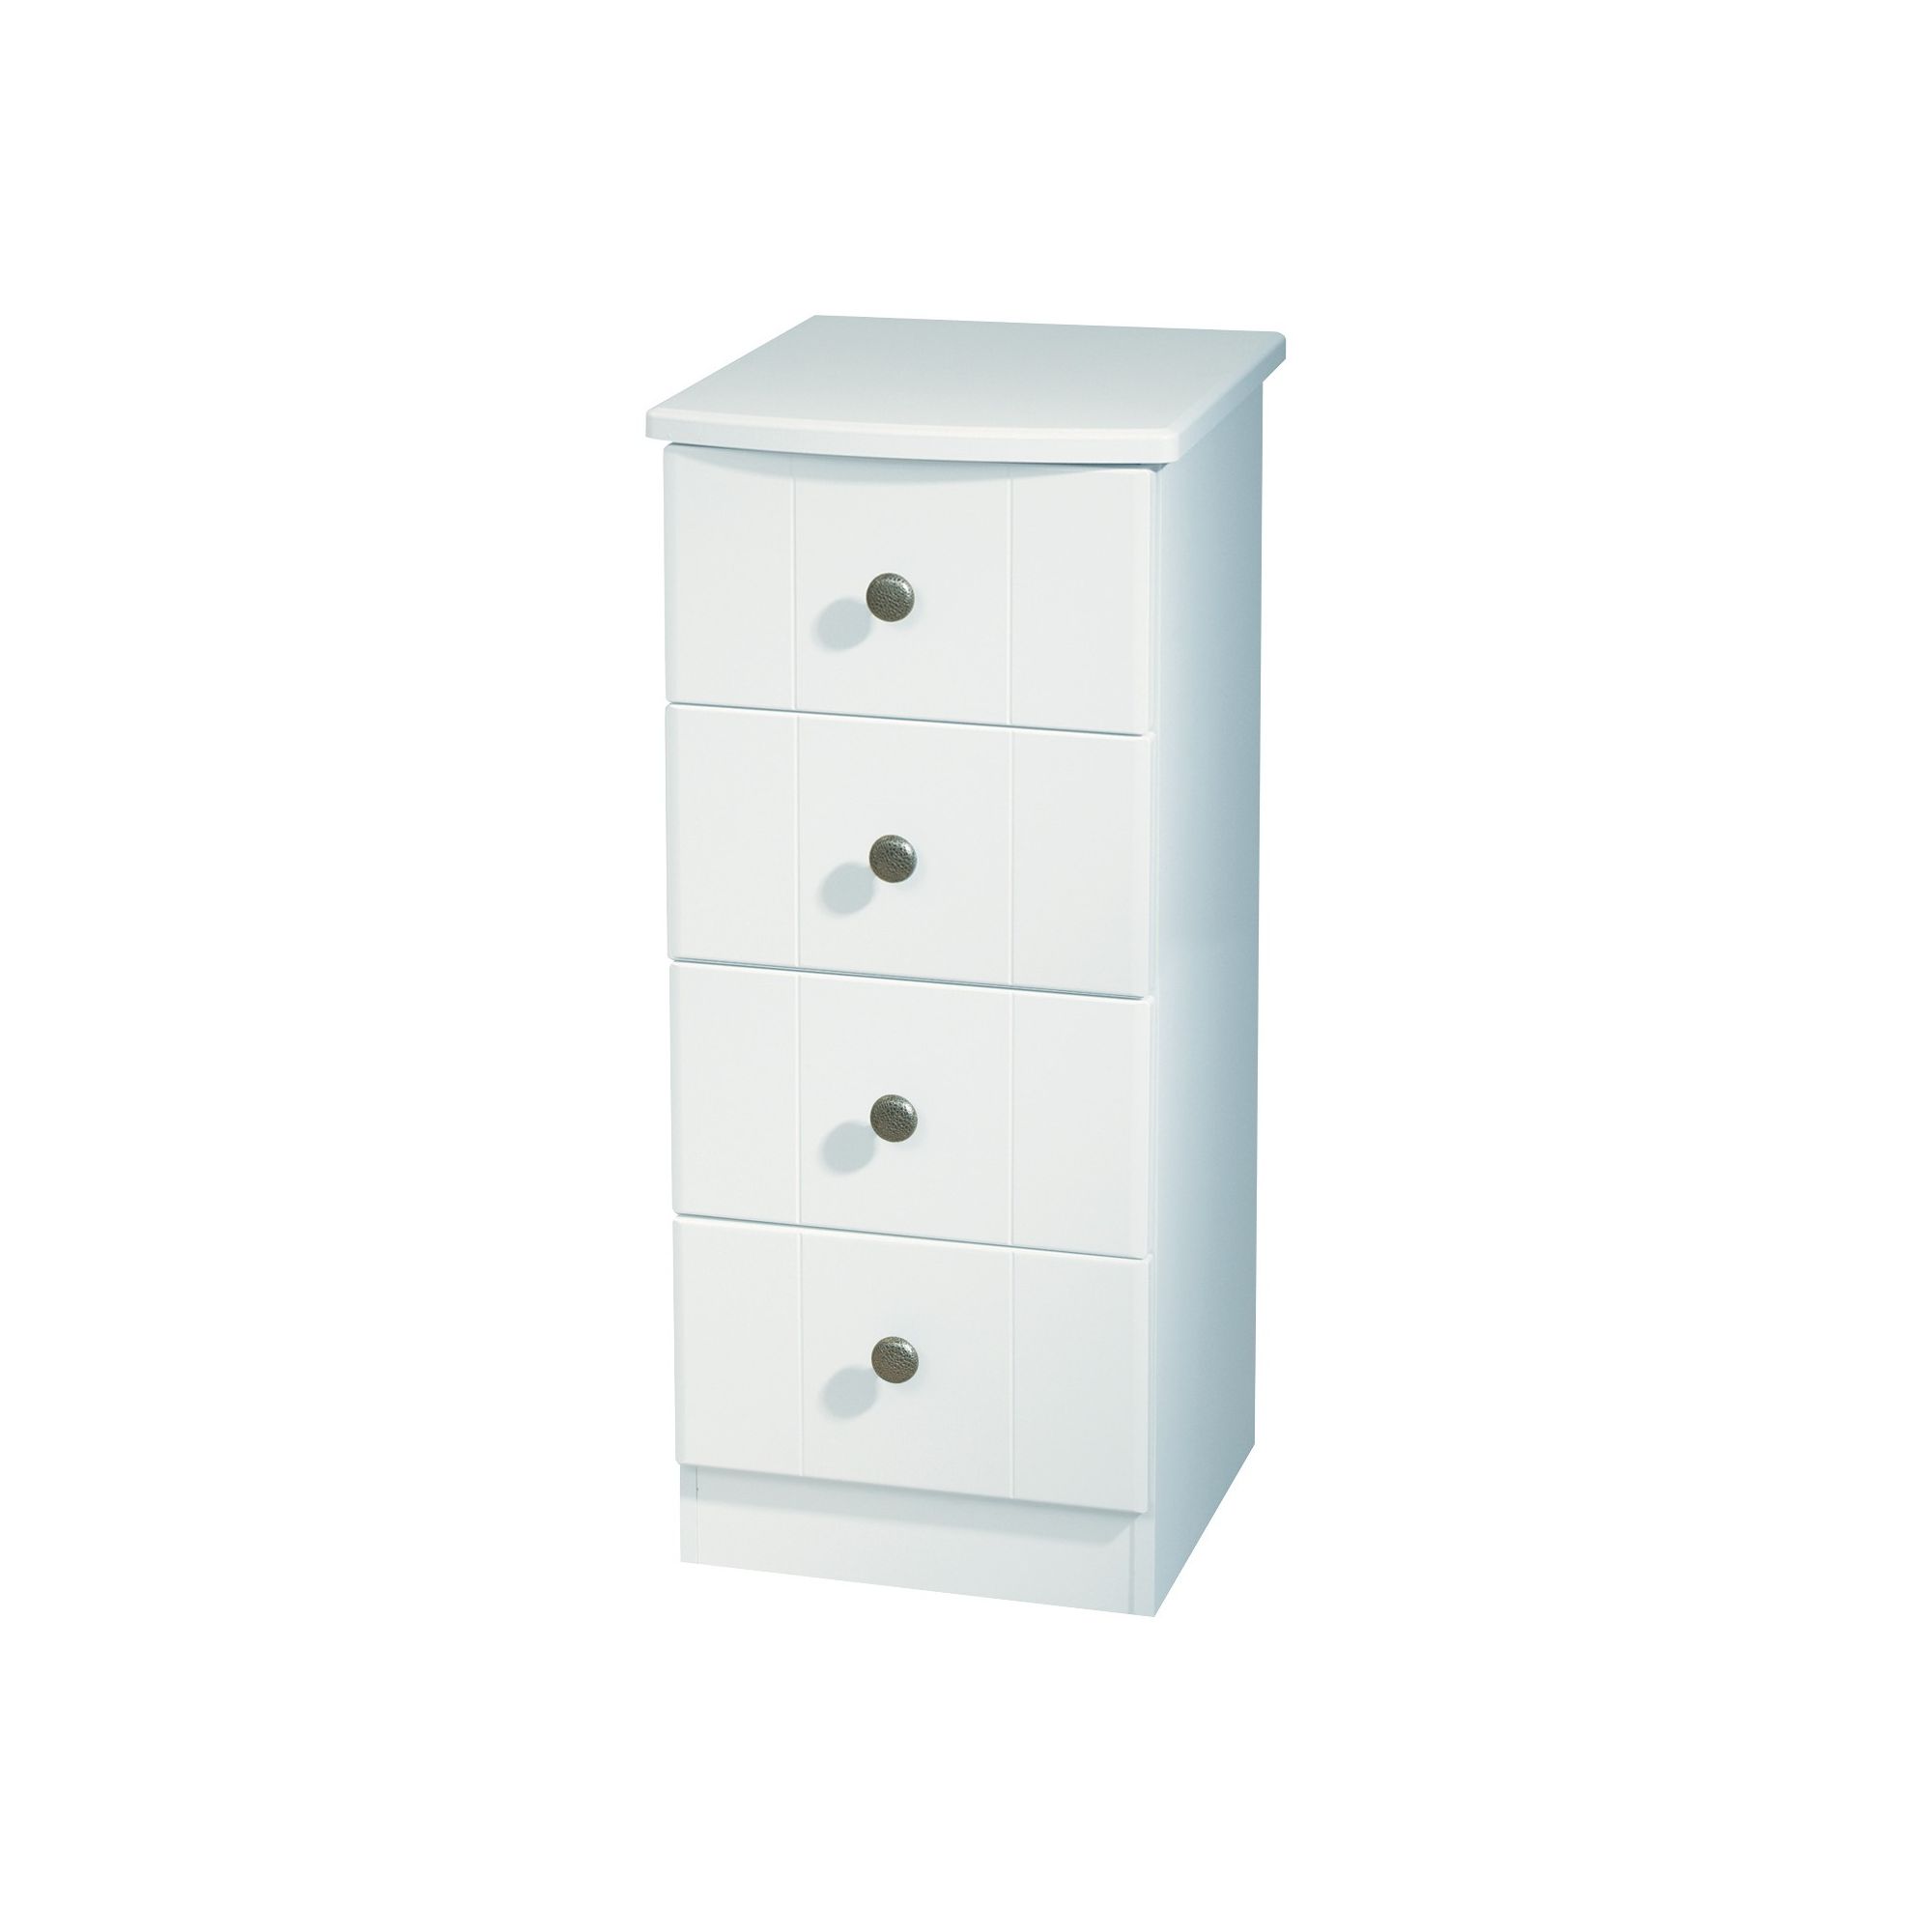 Welcome Furniture Kingston 4 Drawer Chest with Locker - White at Tesco Direct